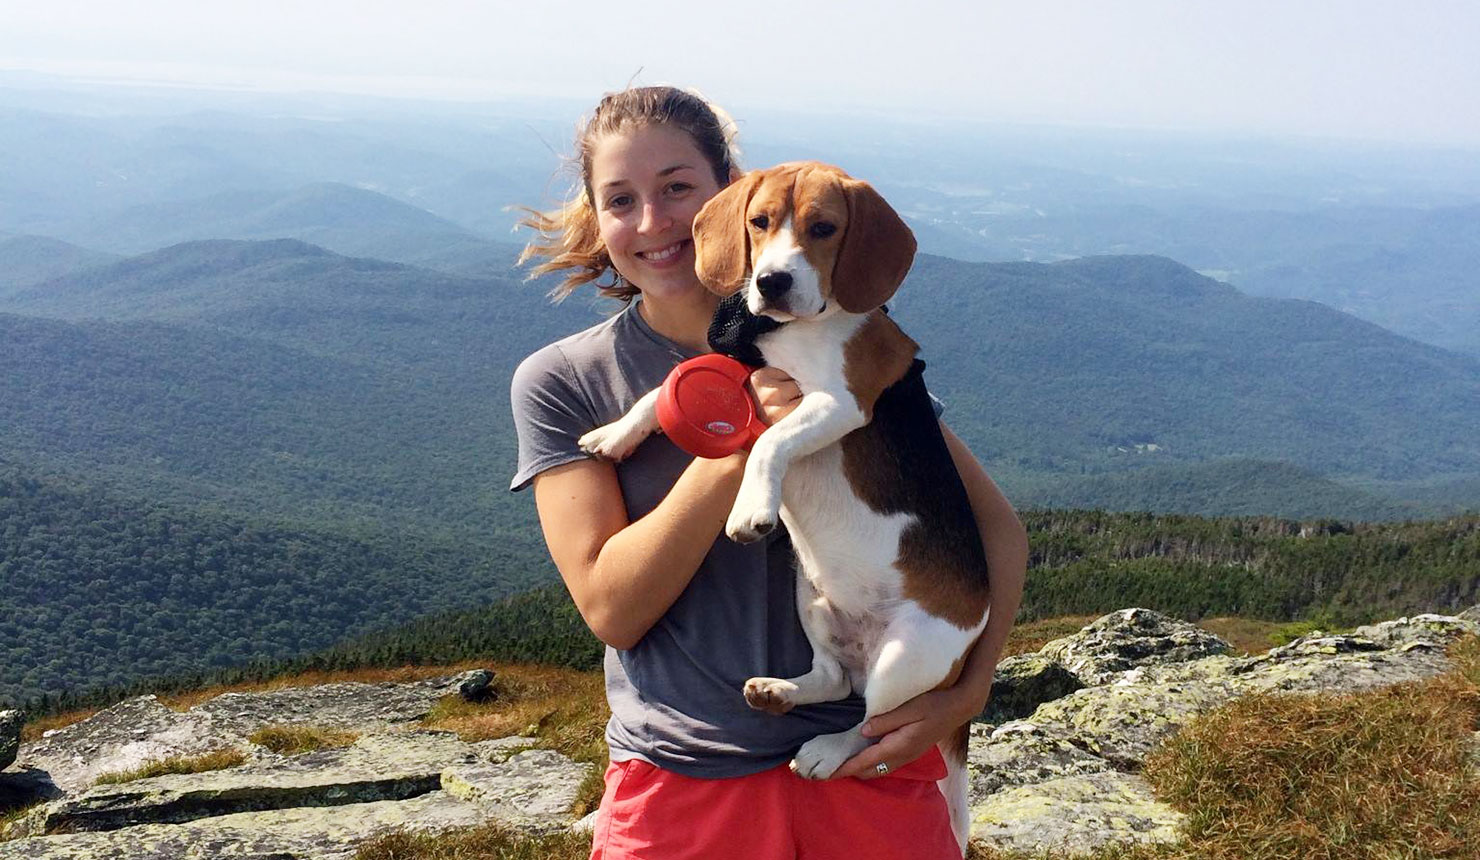 Catherine Gordon with her dog, Moby, at the summit of Camel's Hump in Vermont.